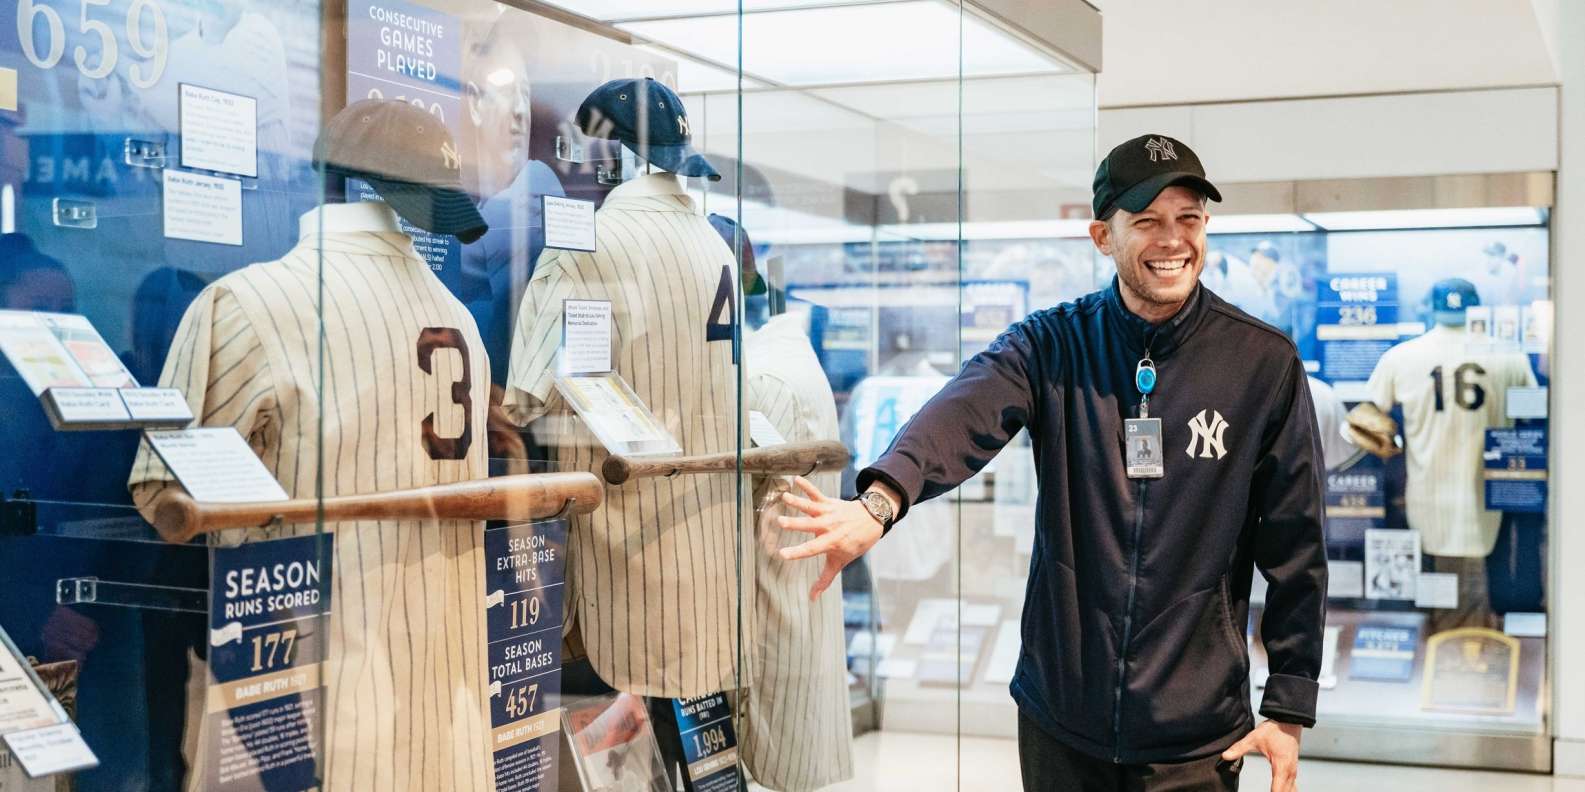 New York Yankees Museum presented by Bank of America - Featured